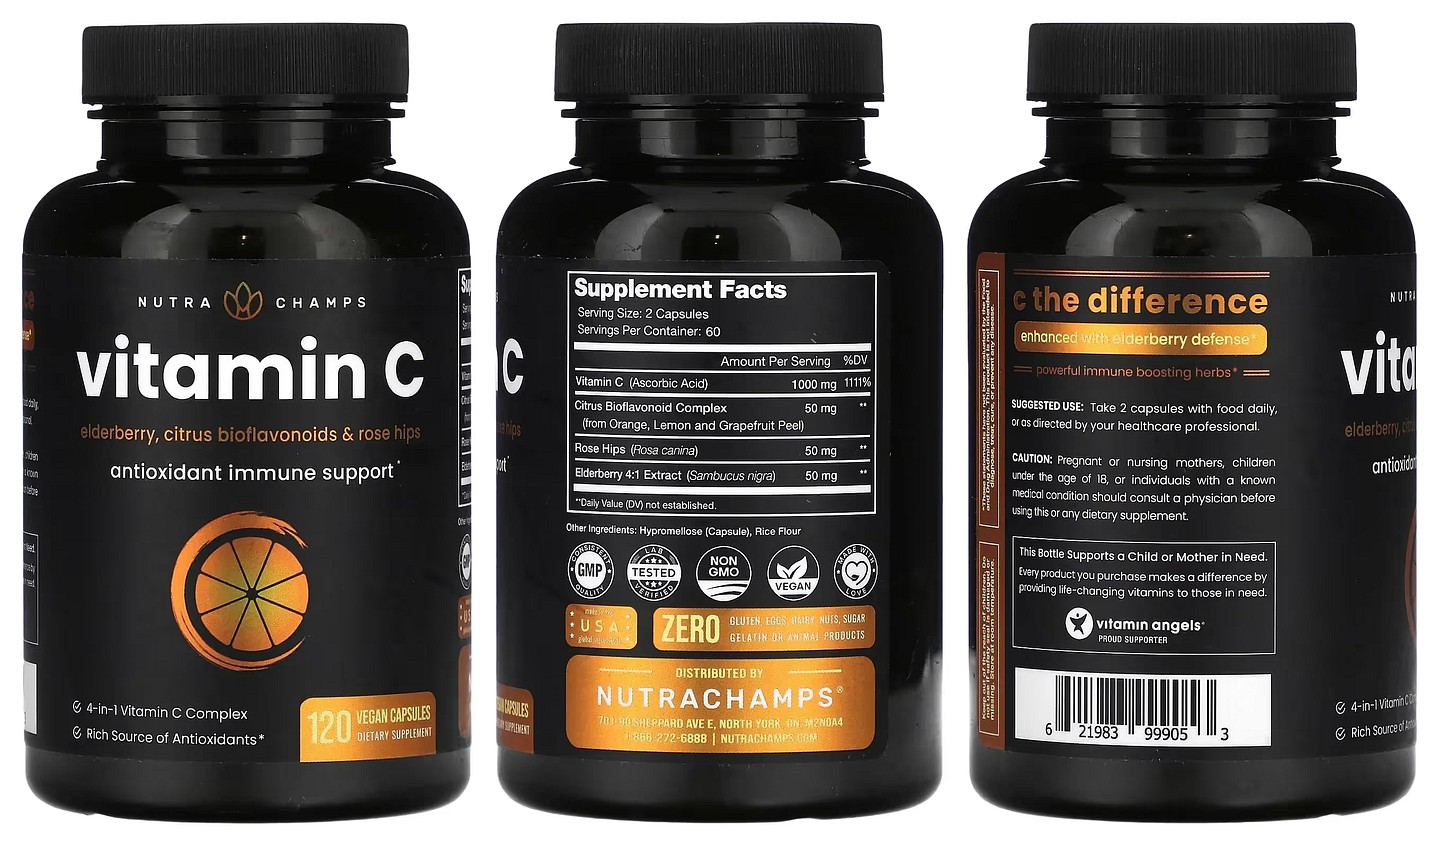 NutraChamps, Vitamin C packaging